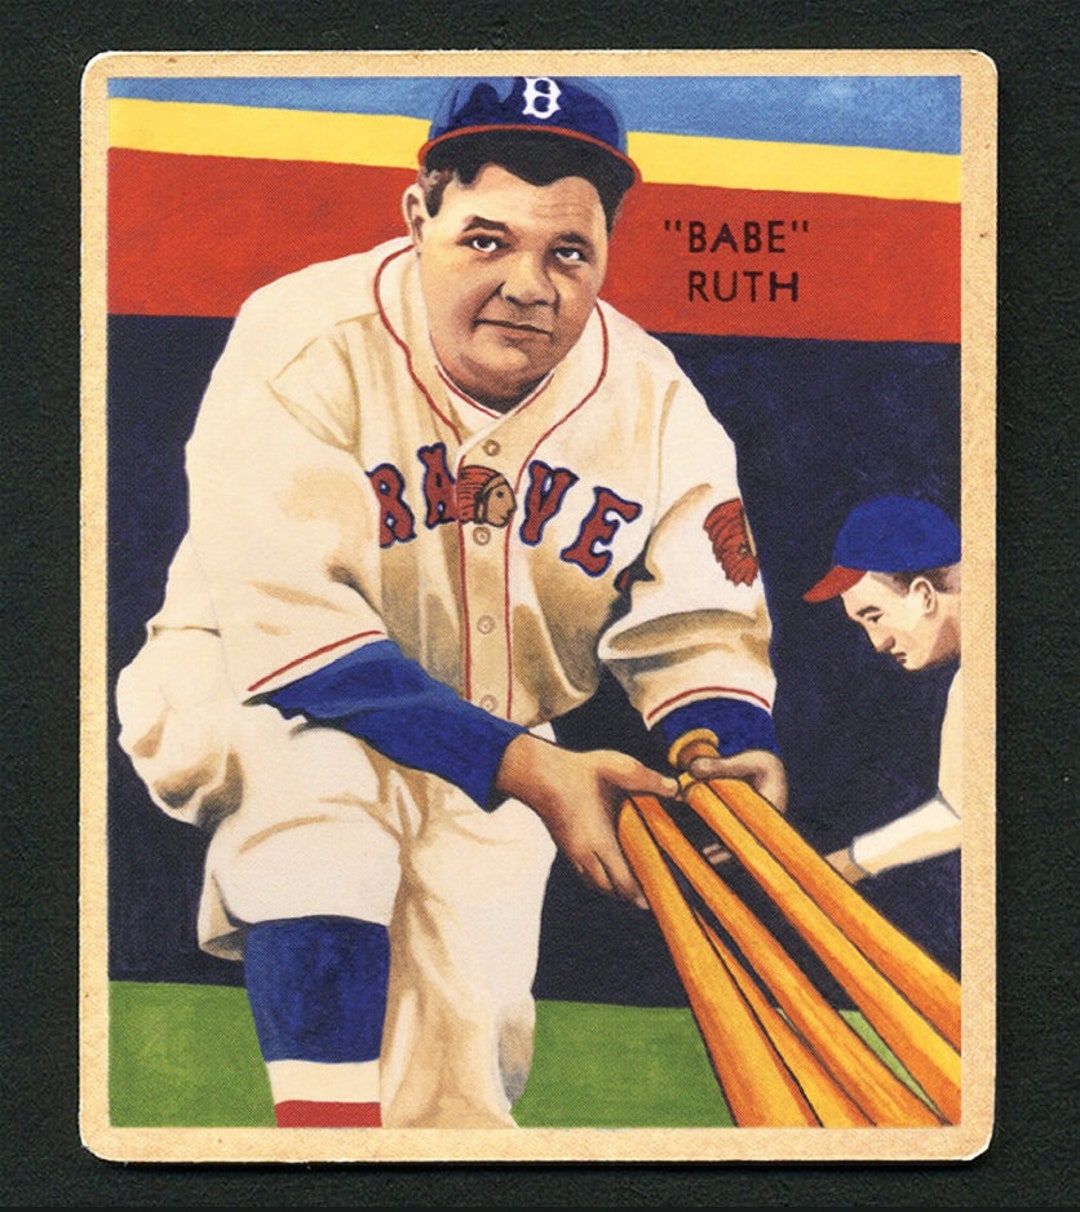 1935 Diamond Stars Babe Ruth Limited to 100 Cards -  Finland